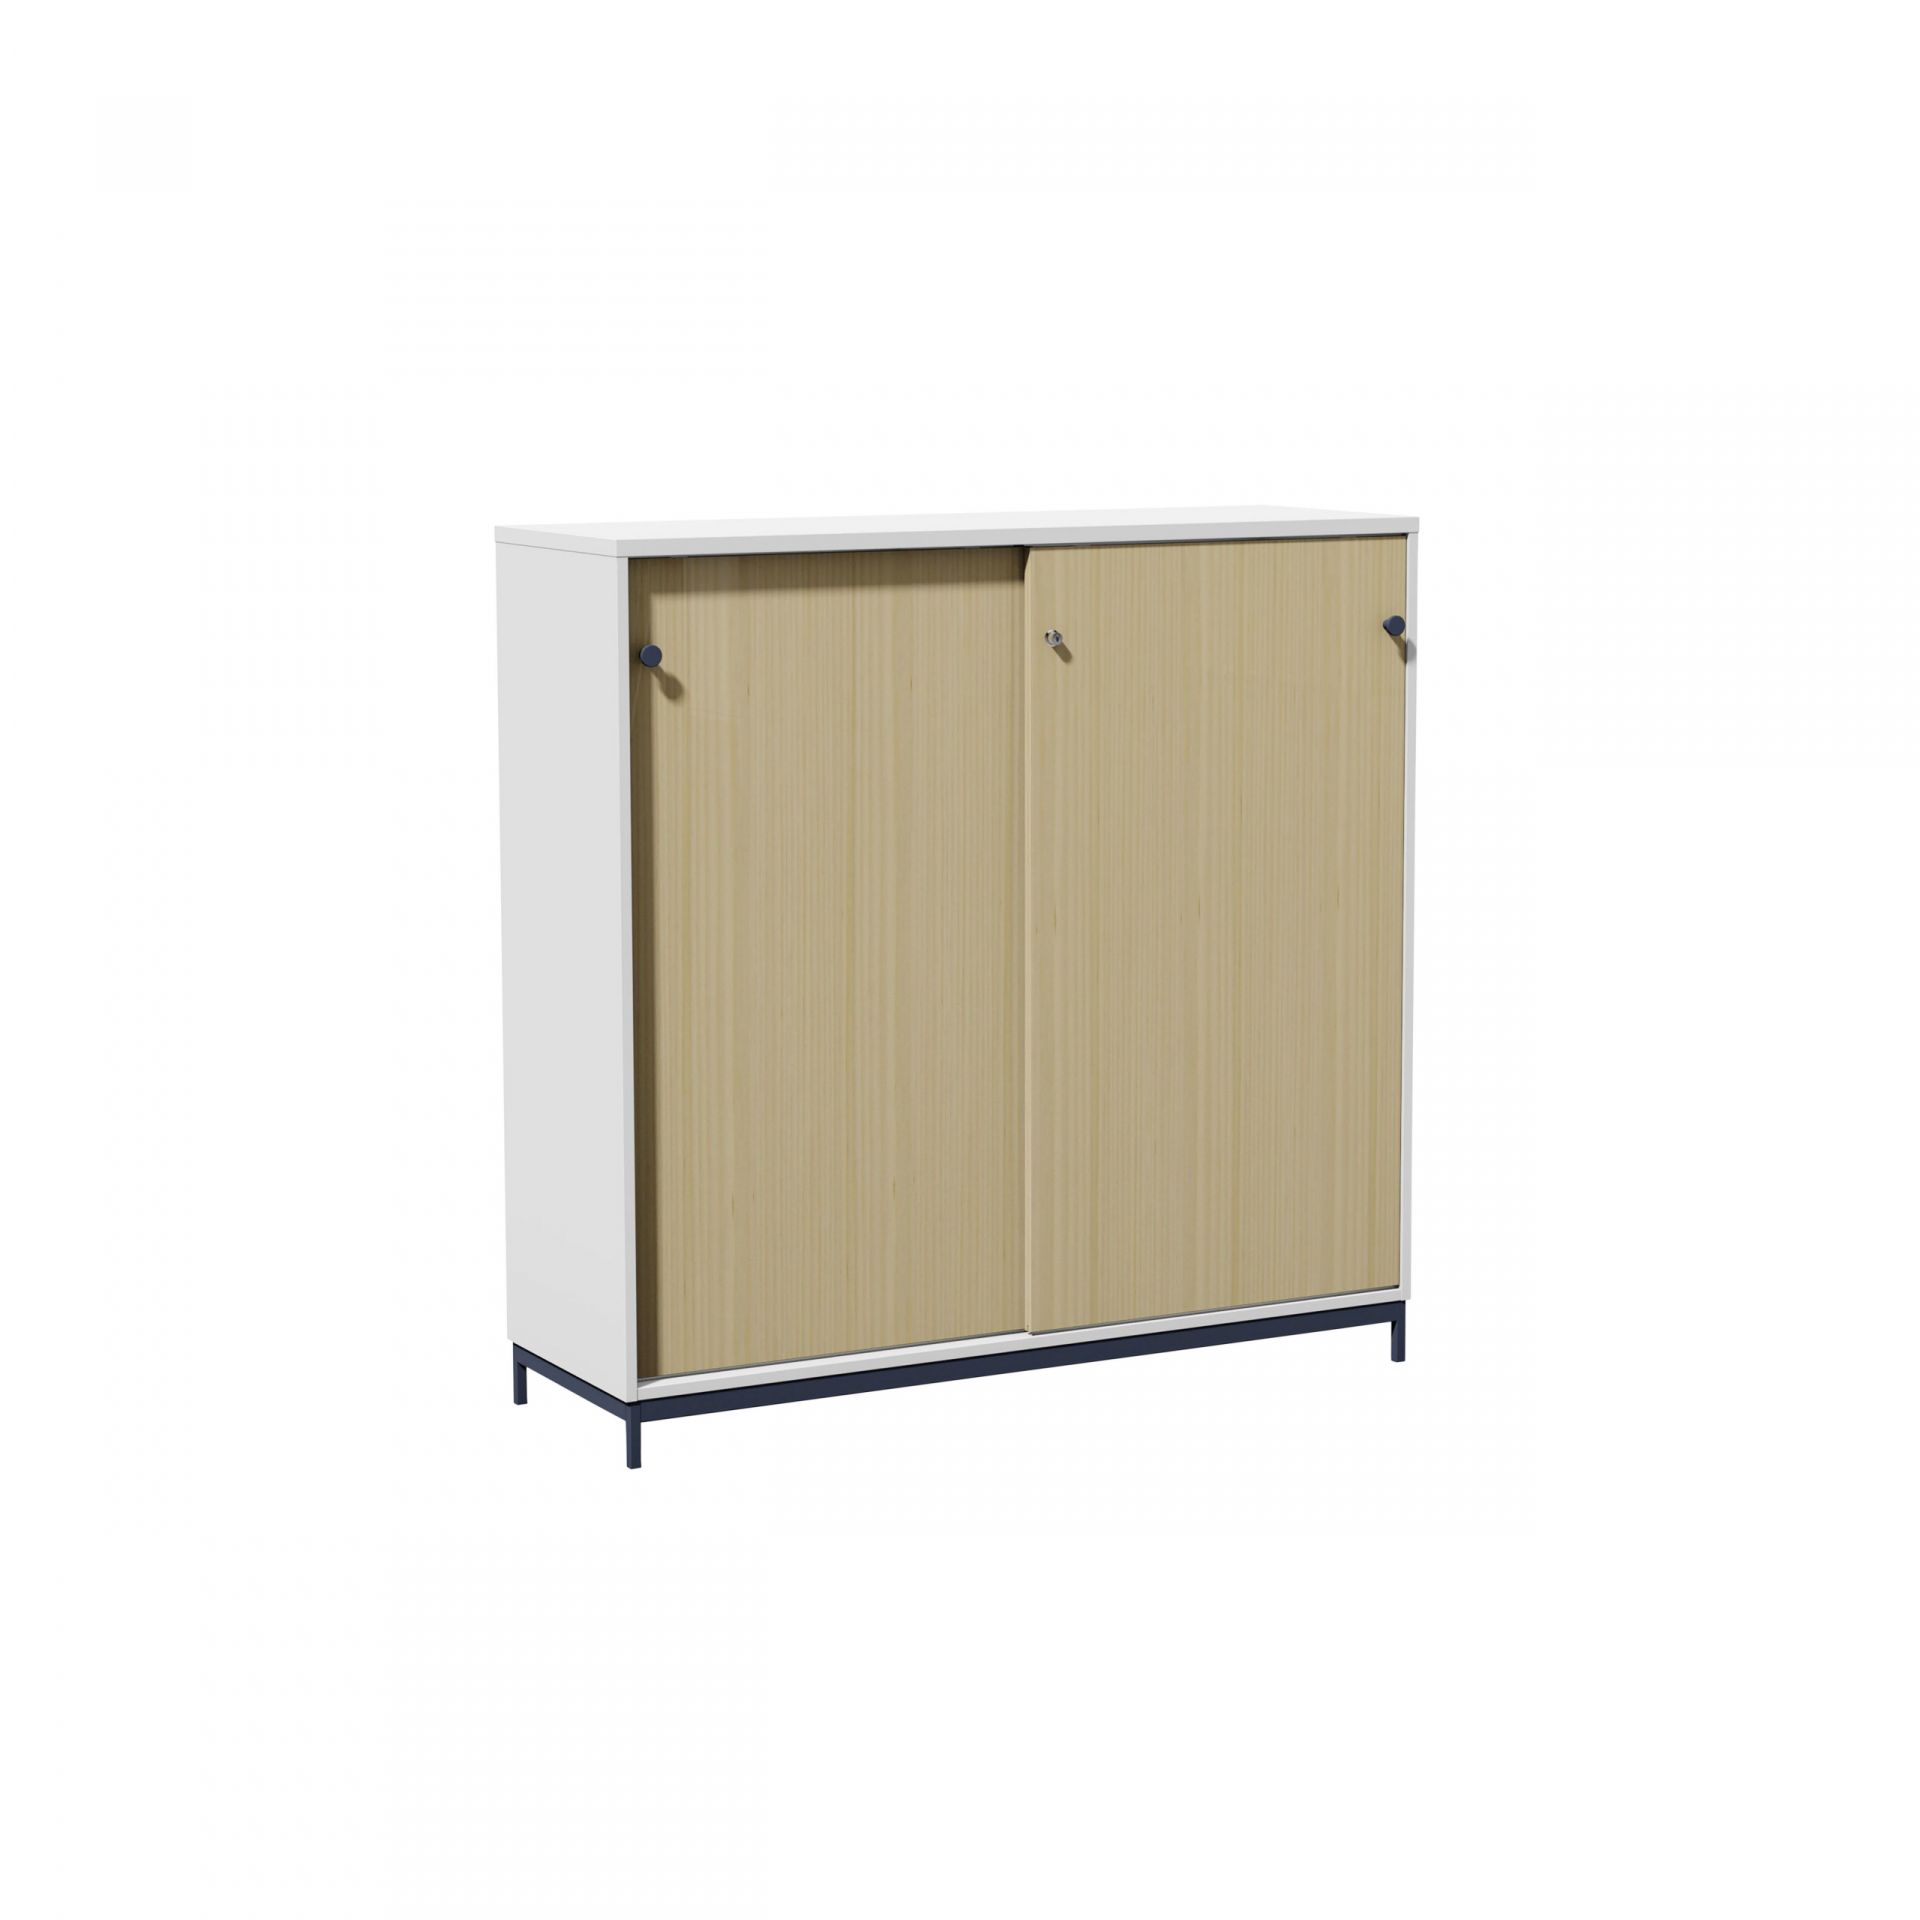 Hold Sliding-door cabinet product image 1